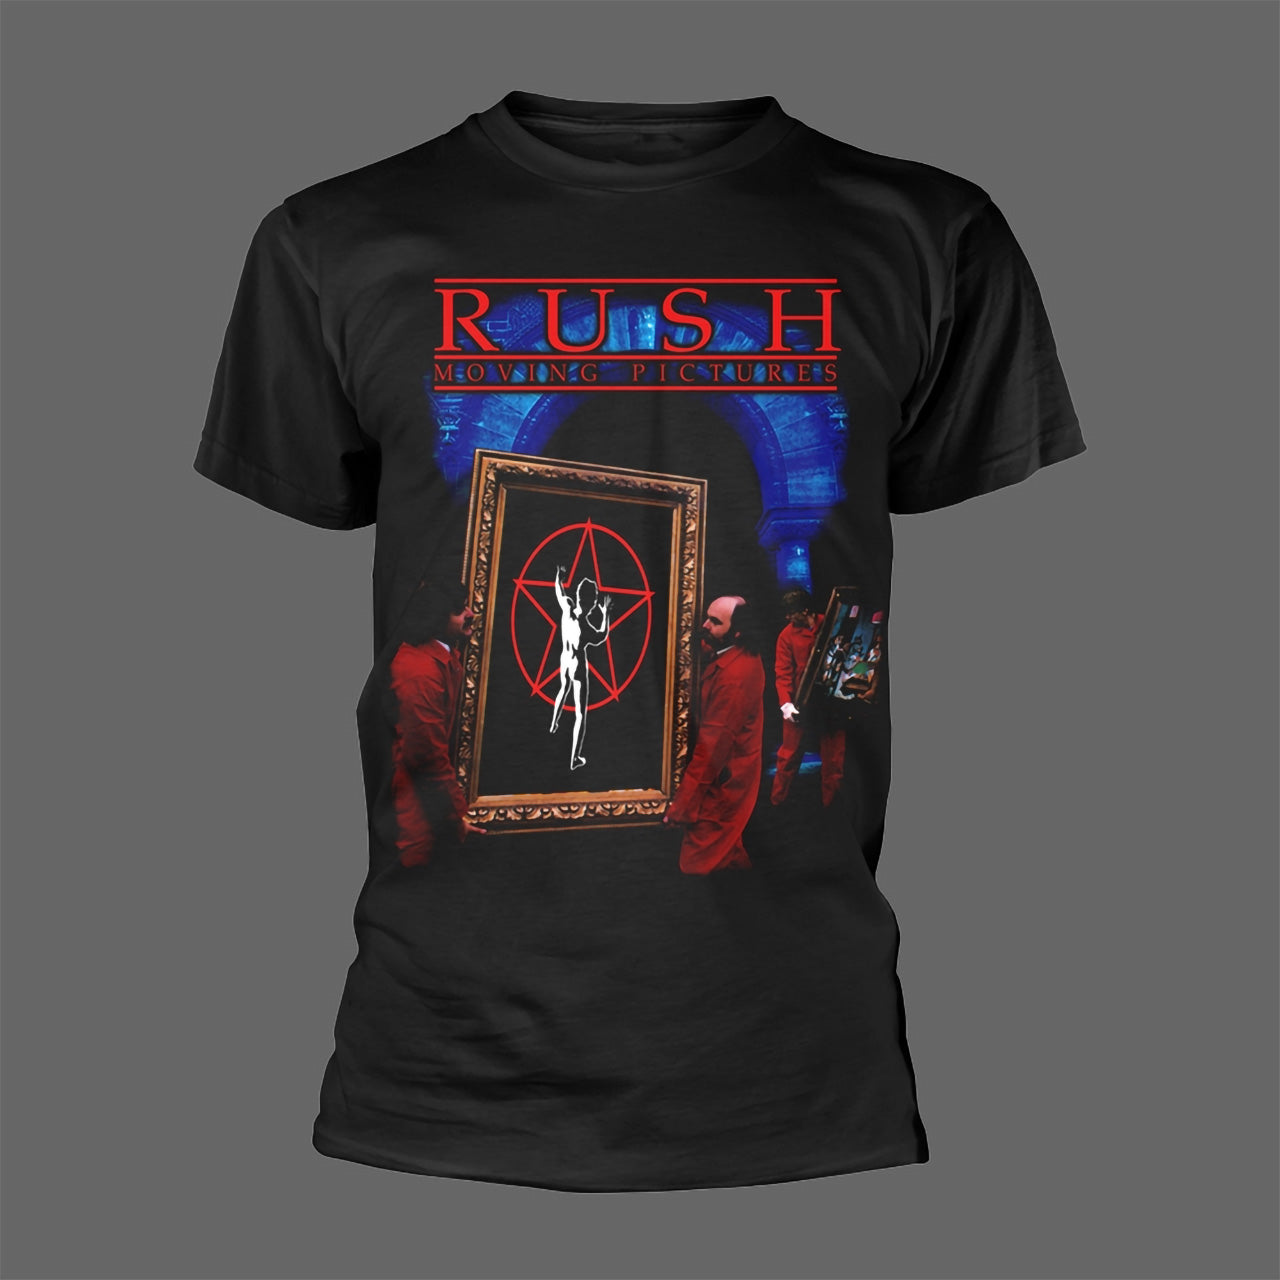 Rush - Moving Pictures (T-Shirt)